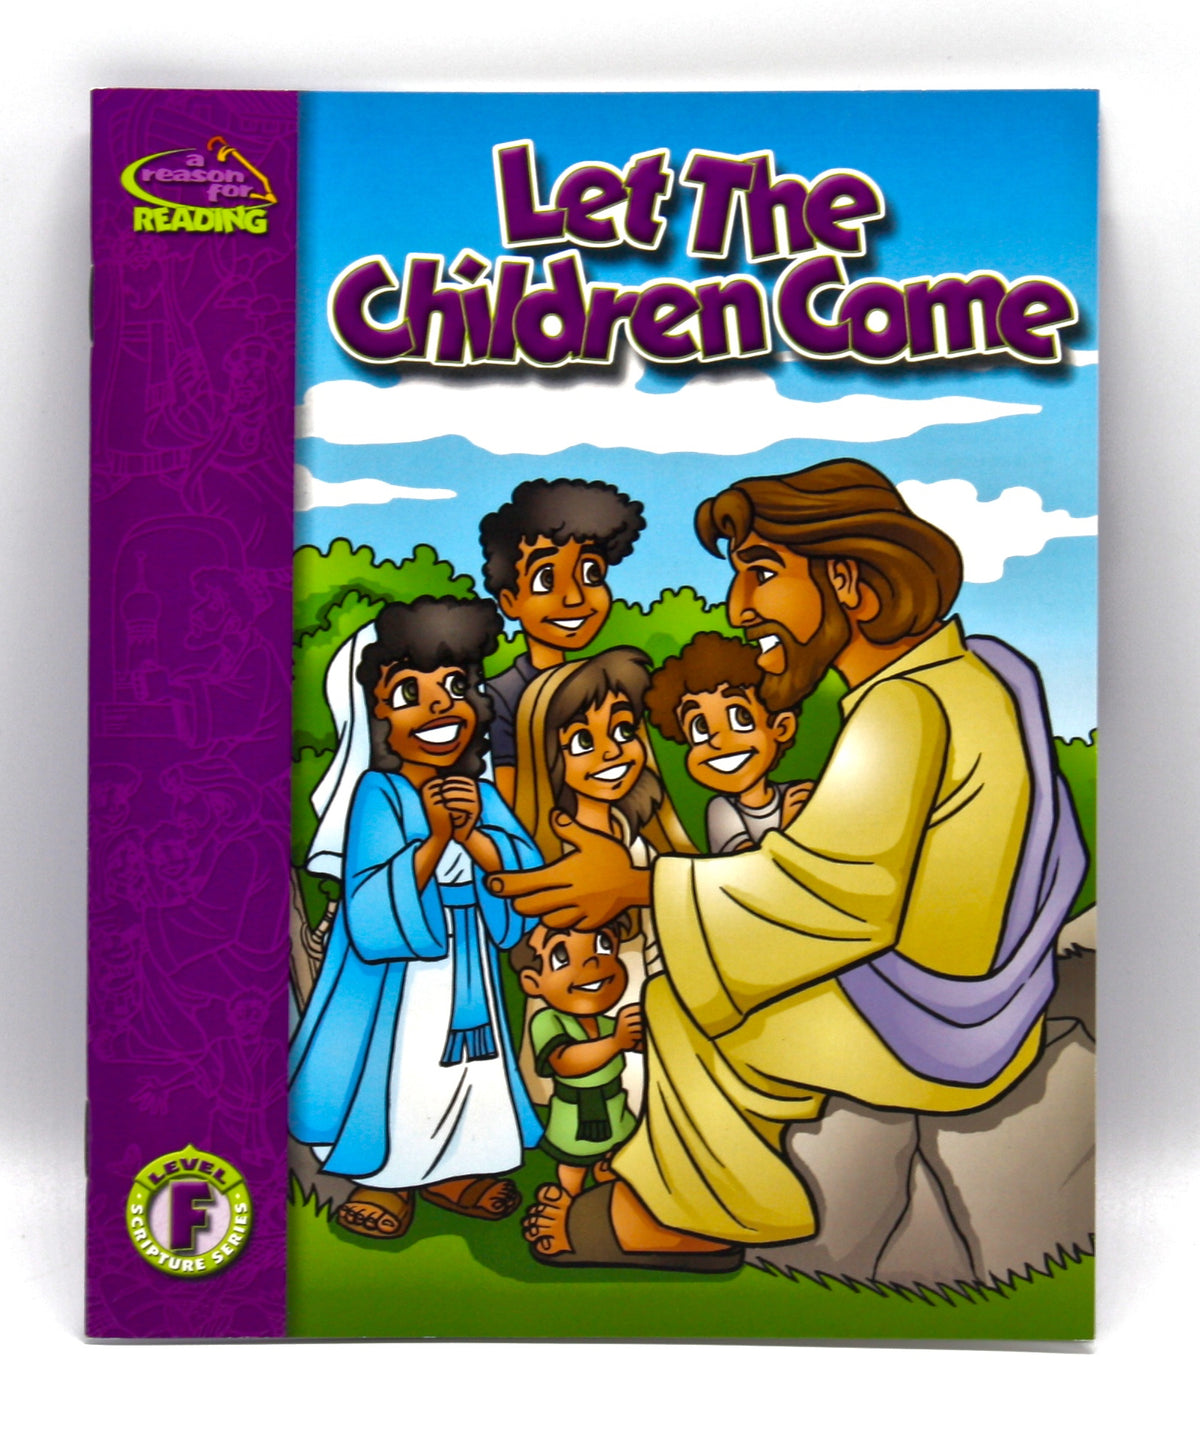 A Reason For Reading® Beginning Readers Set - New Testament Stories (10 Books)